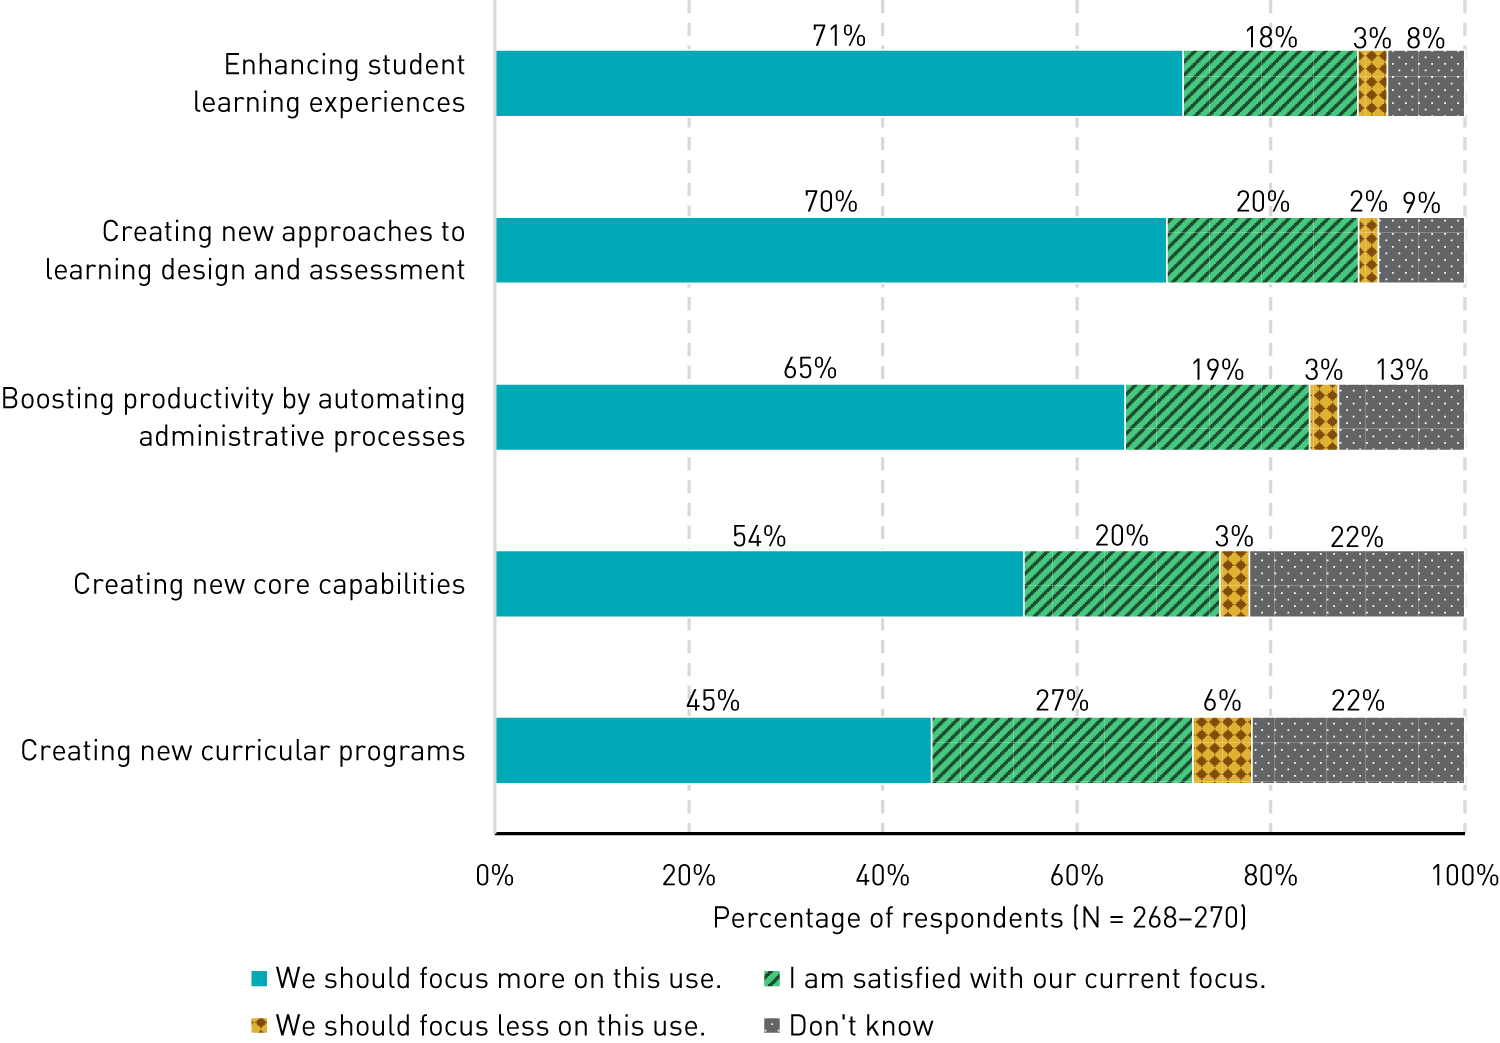 Bar chart showing desired focus for five uses of AI: Enhancing student learning experiences (should focus more, 71%; satisfied with focus, 18%; should focus less, 3%; don’t know, 8%), Creating new approaches to learning design and assessment (70%, 20%, 2%, 9%), Boosting productivity by automating administrative processes (65%, 19%, 3%, 13%), Creating new core capabilities (54%, 20%, 3%, 22%), Creating new curricular programs (45%, 27%, 6%, 22%).